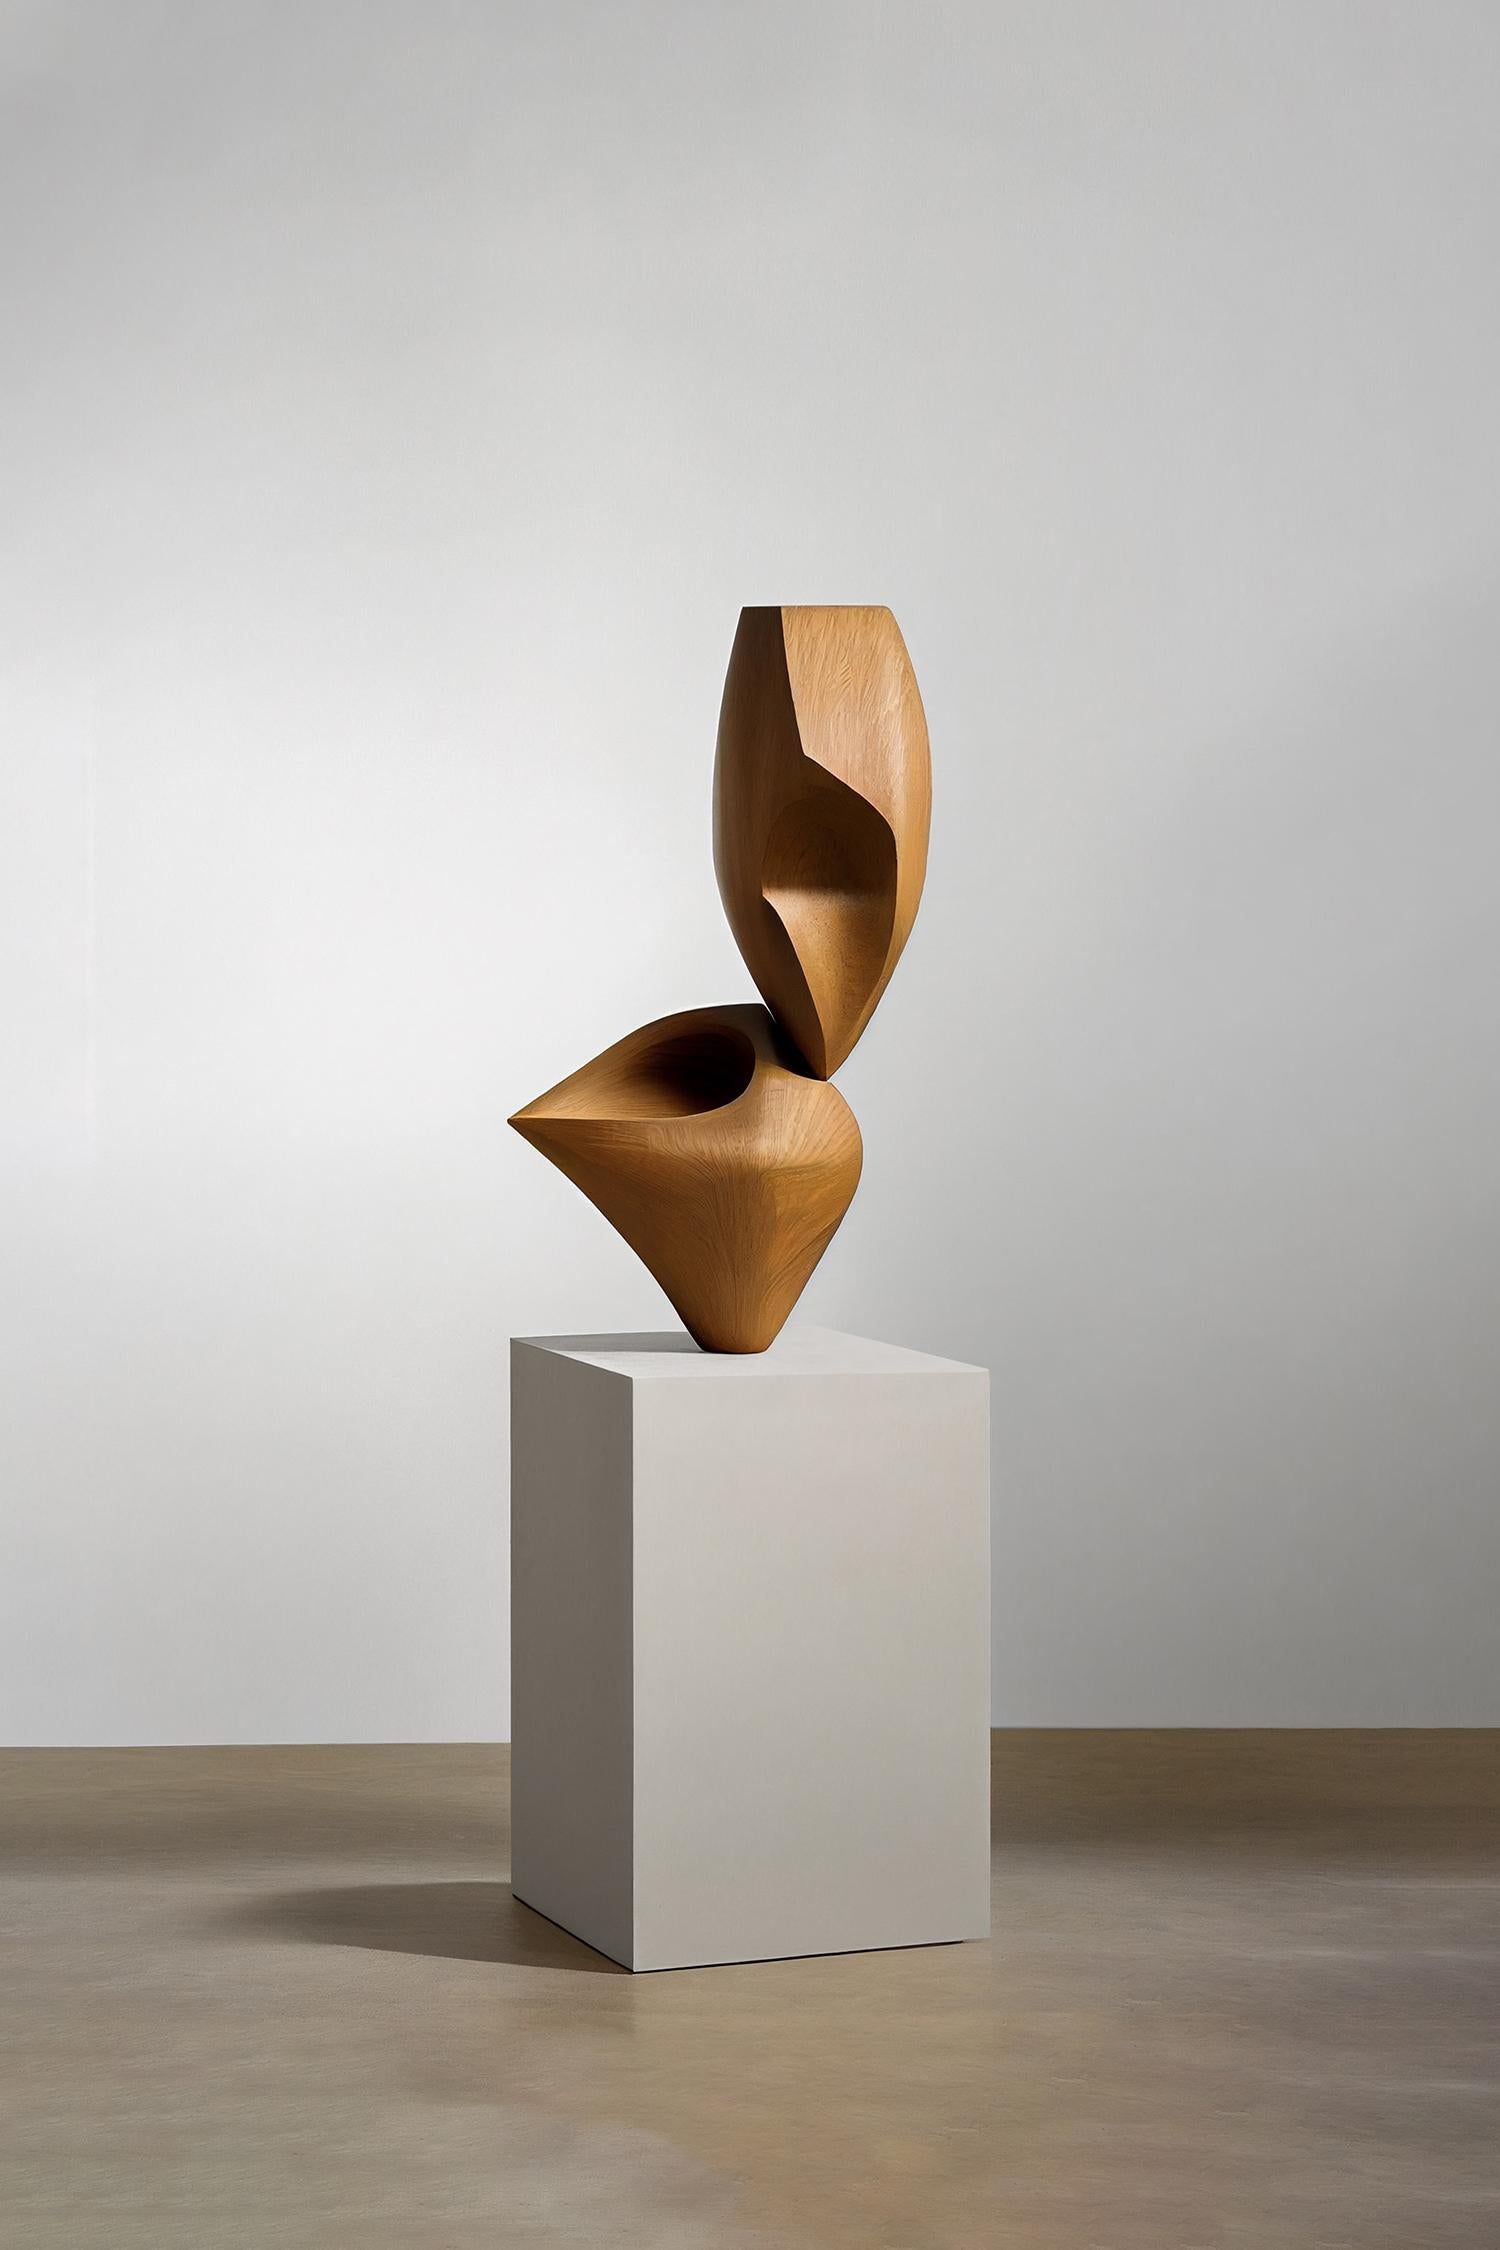 This monolithic sculpture, designed by the talented Artist Joel Escalona, is a towering example of beauty in craftsmanship. Hand and digital machine made; the standing sculpture stands tall as a monument to the skill of the artist. The wood carved